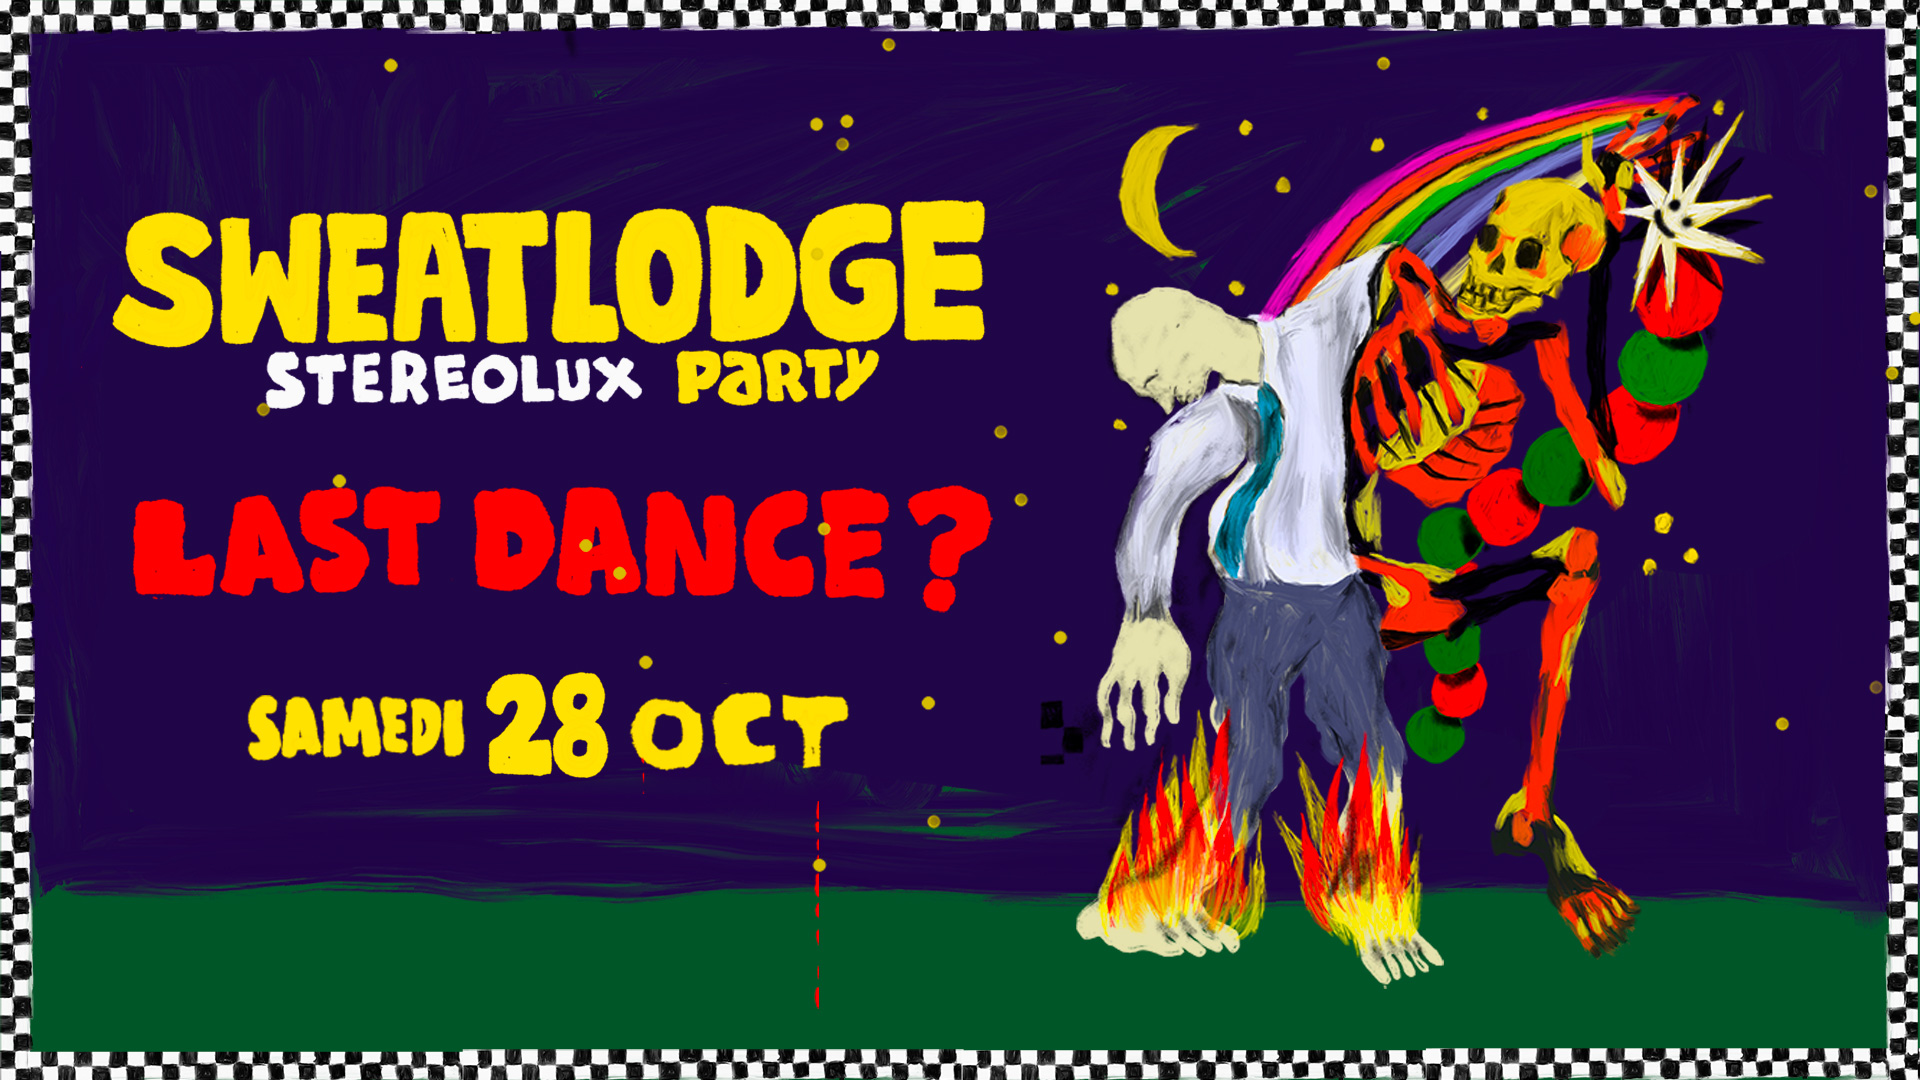 sweatlogde party stereolux nantes